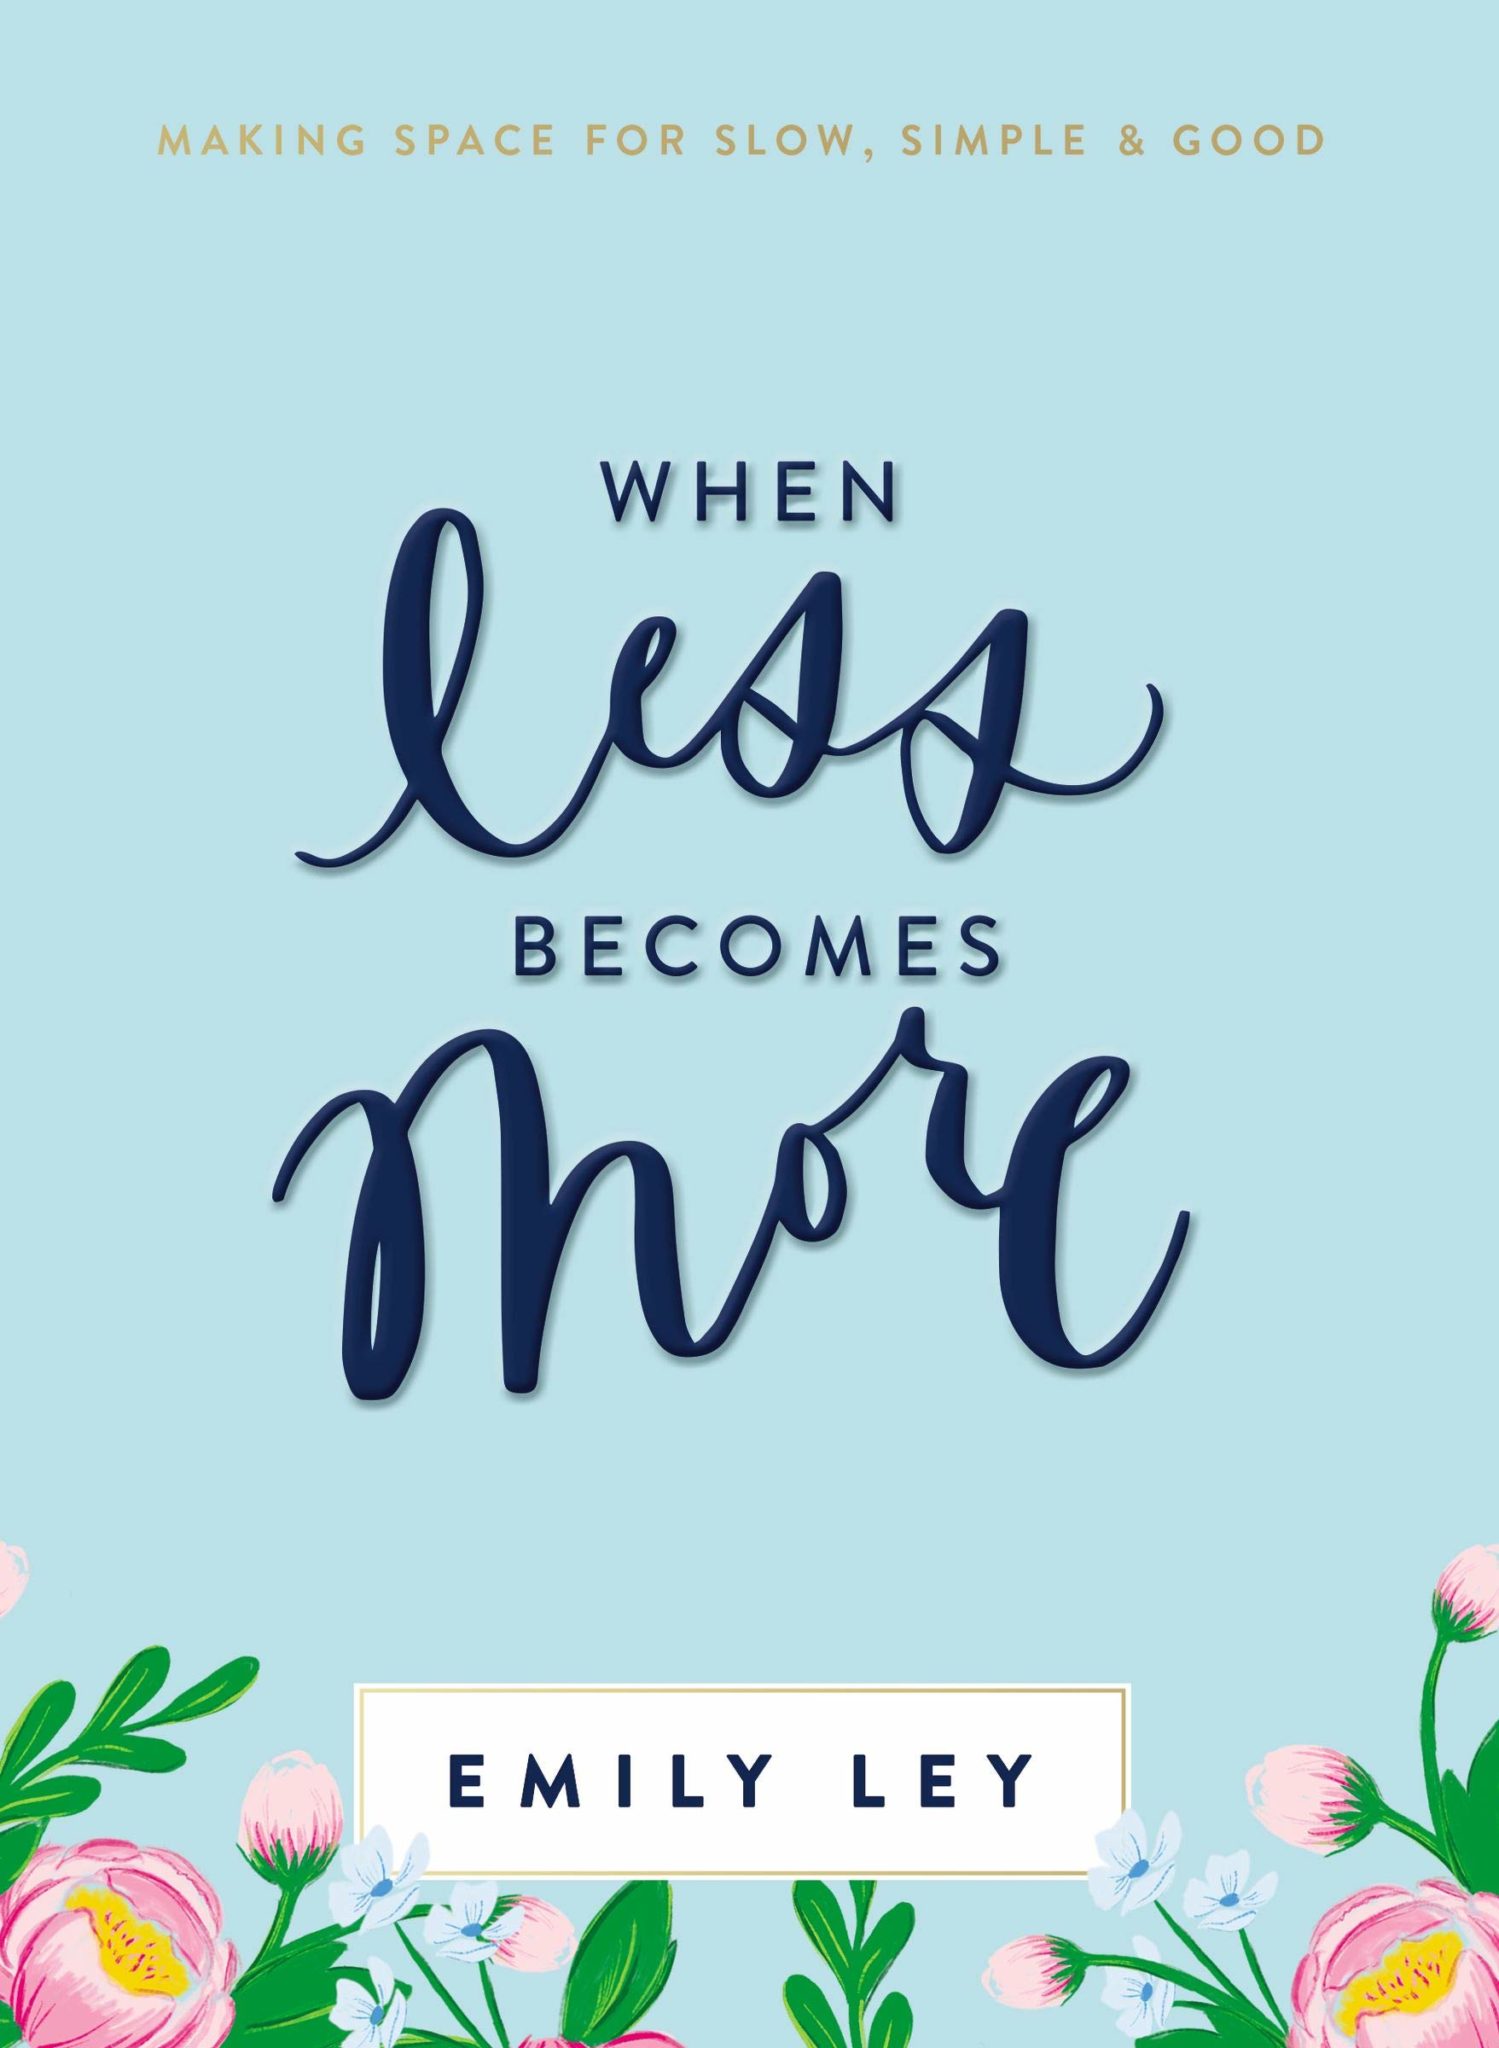 When Less Become More by Emily Ley